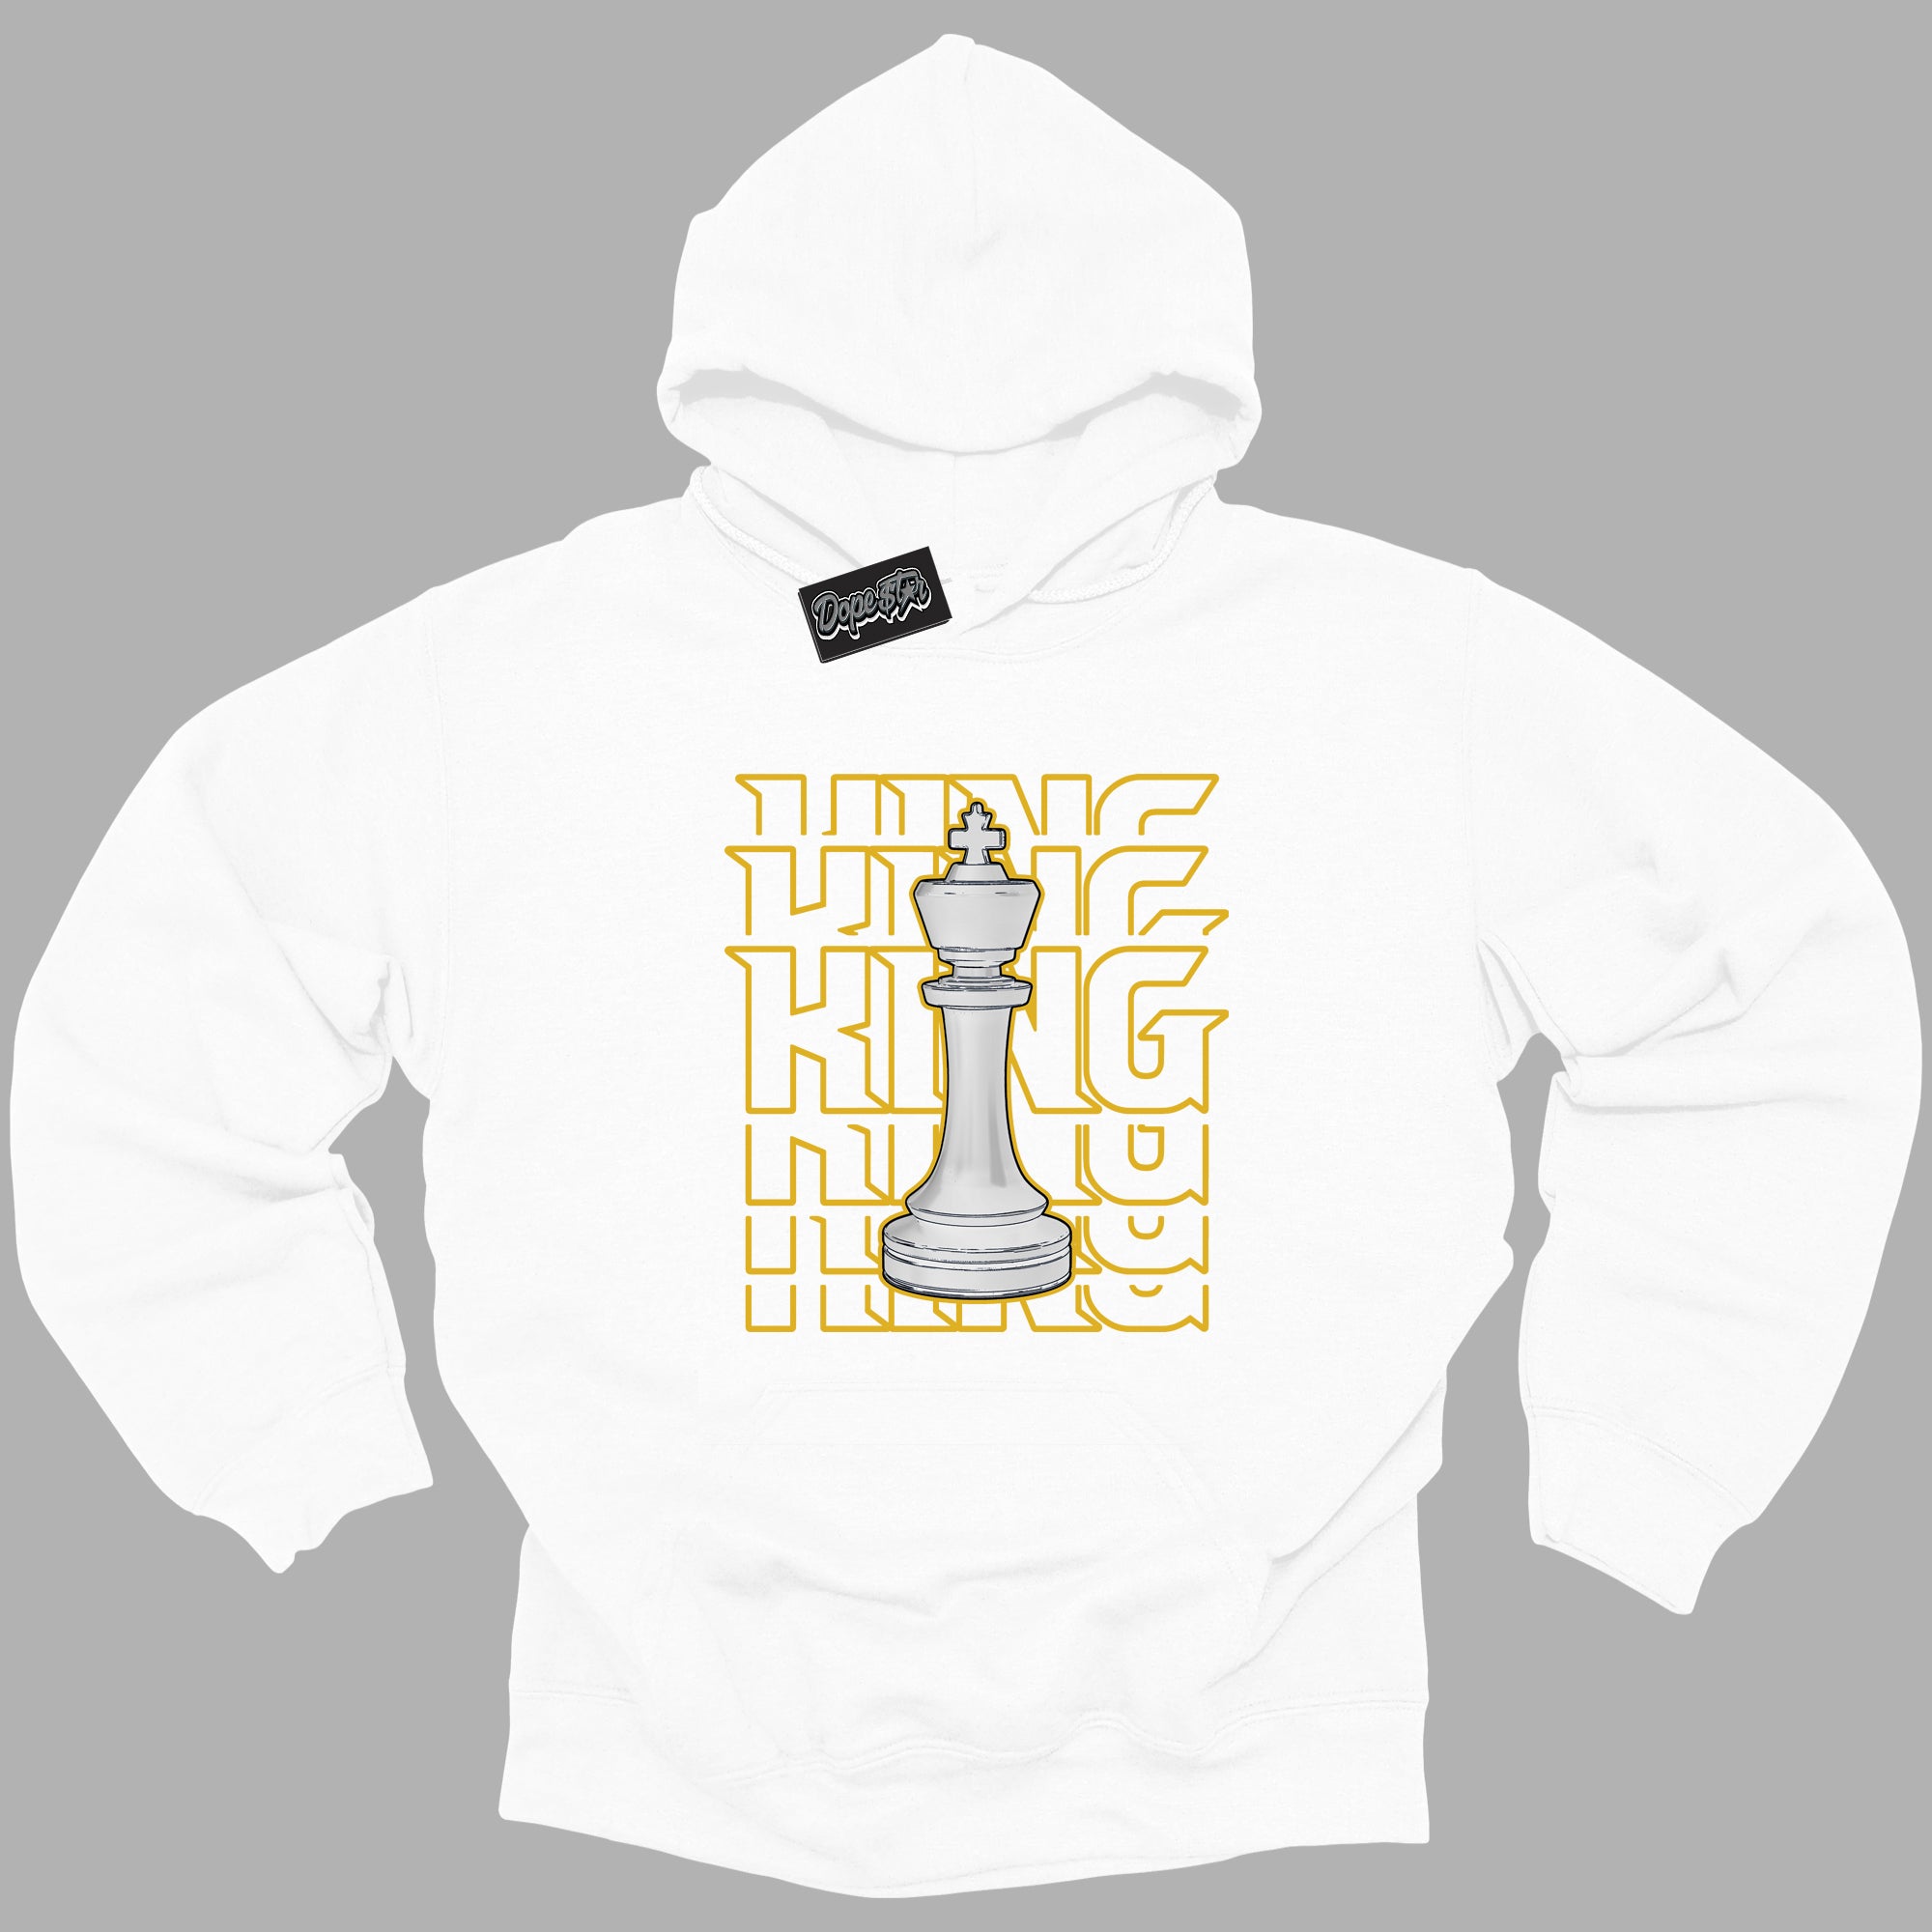 Cool White Hoodie with “ King Chess ”  design that Perfectly Matches Yellow Ochre 6s Sneakers.